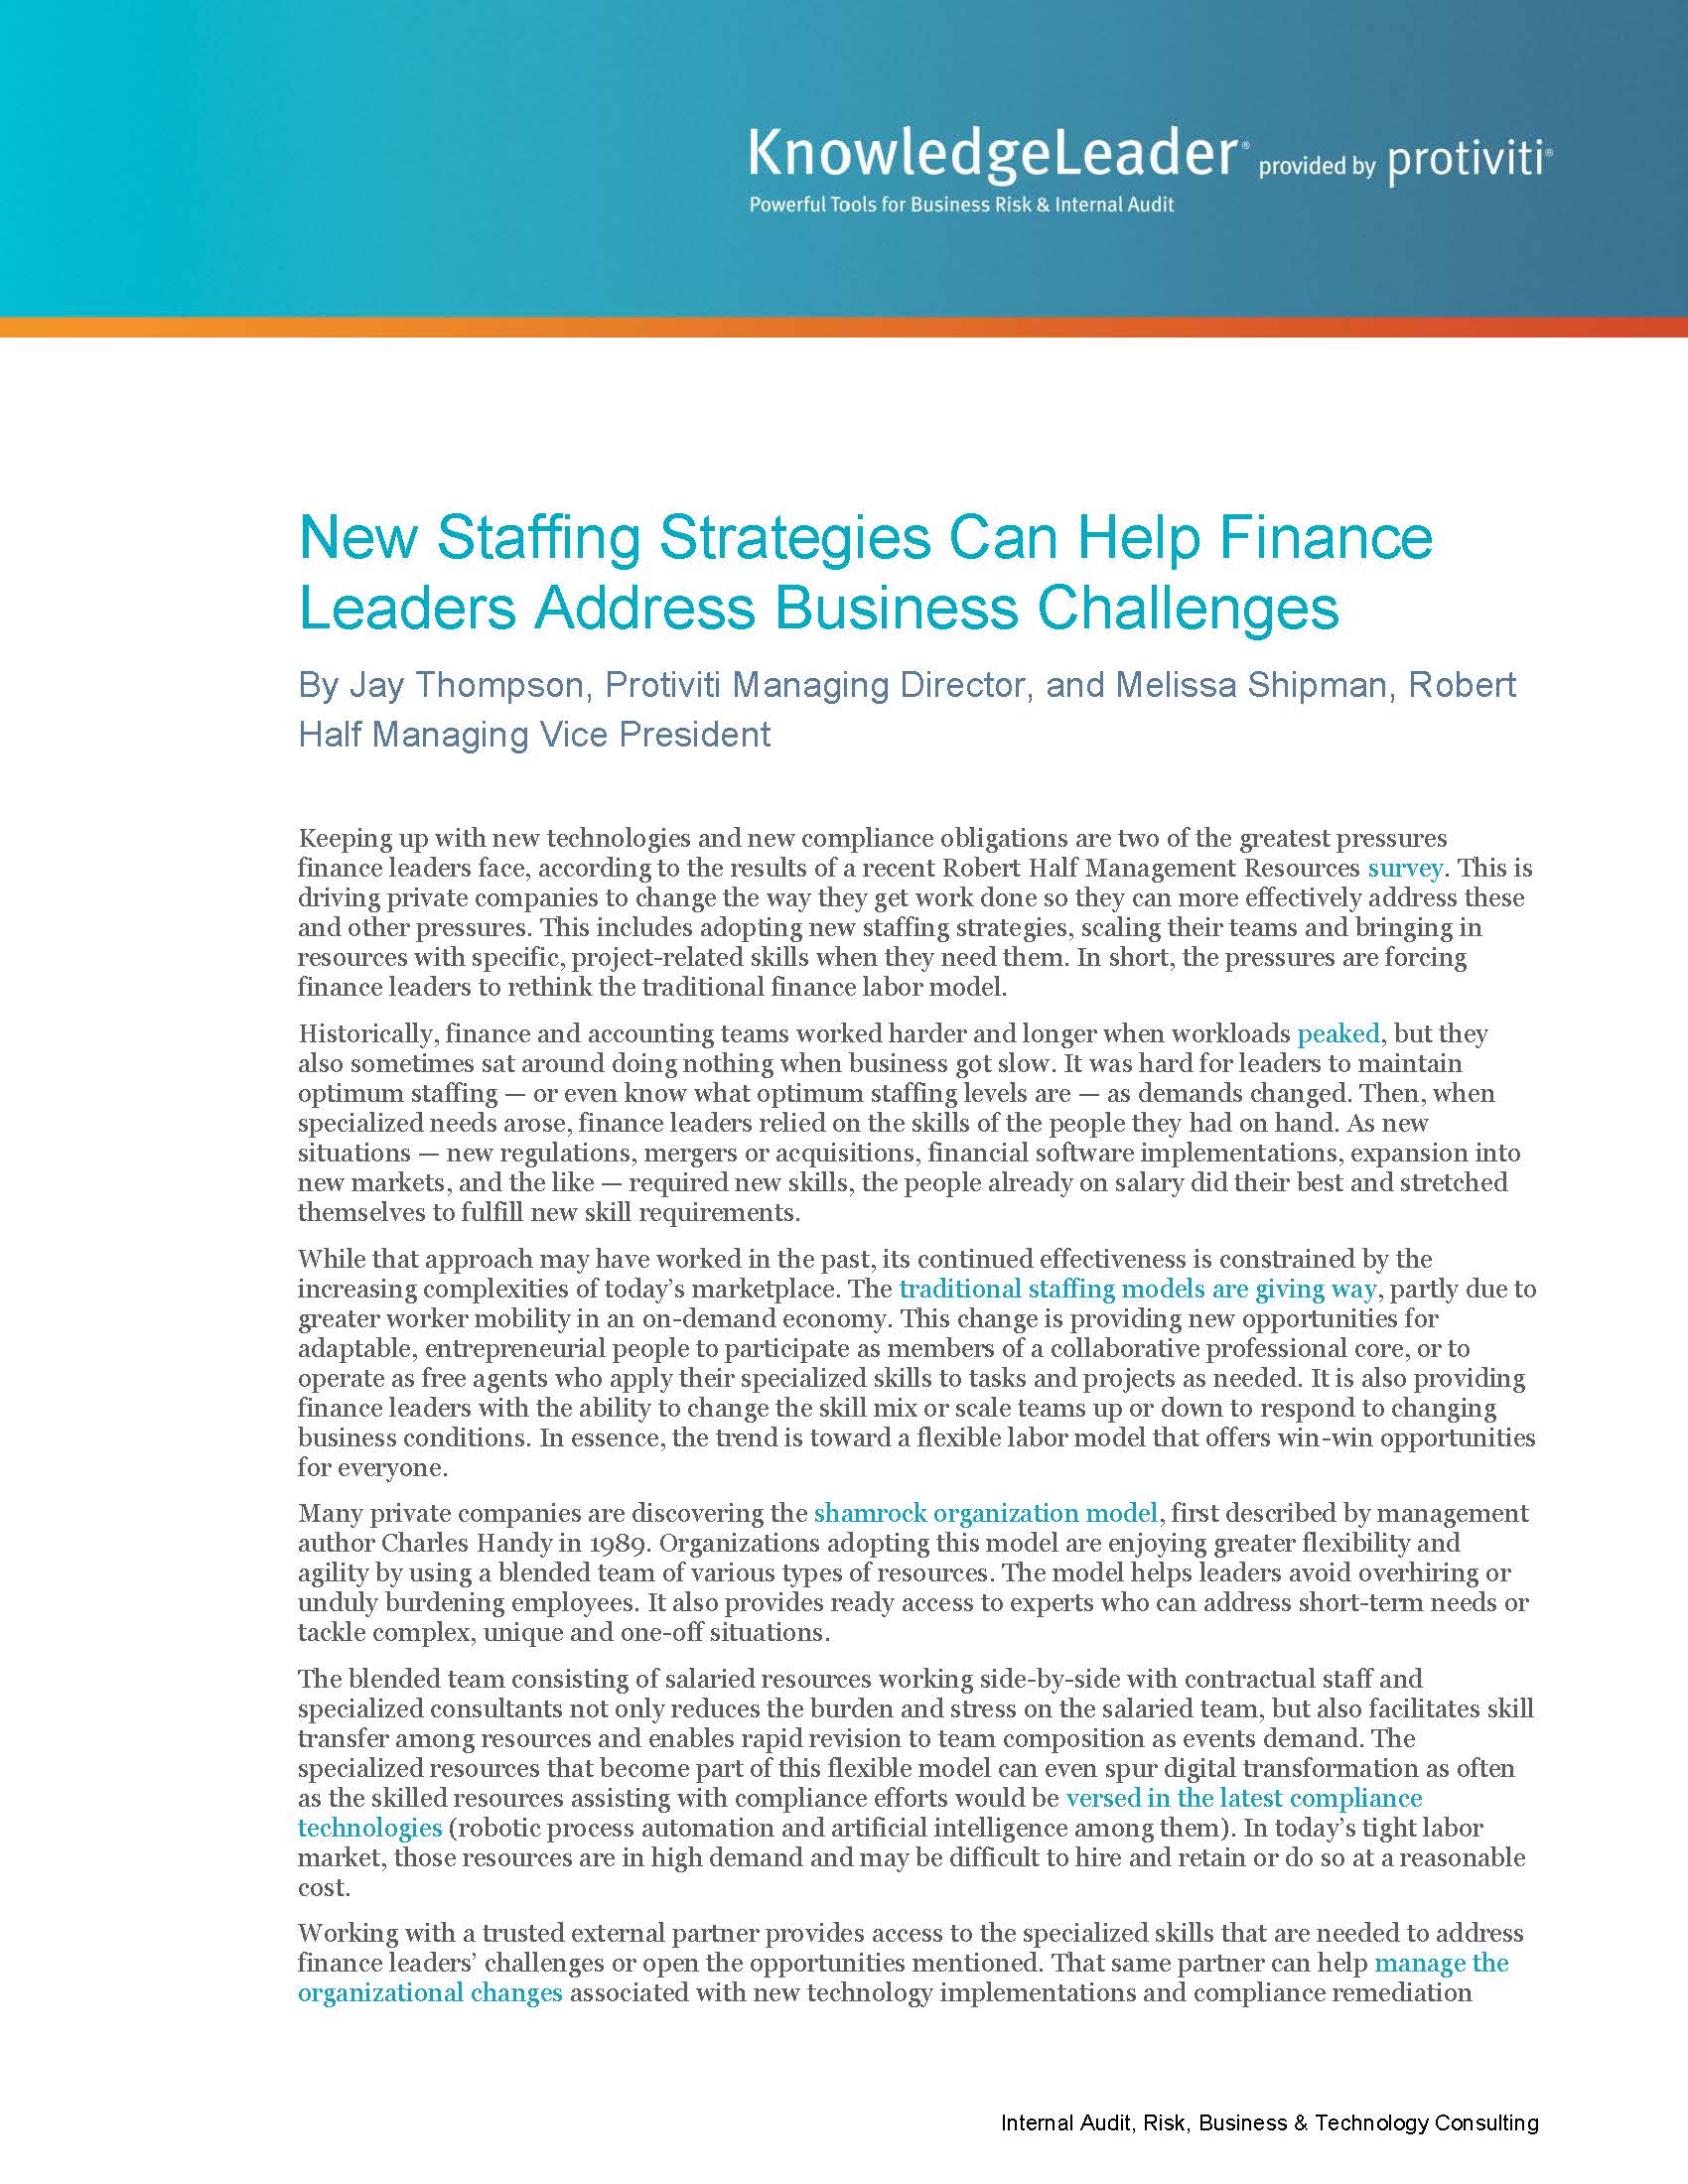 Screenshot of the first page of New Staffing Strategies Can Help Finance Leaders Address Business Challenges